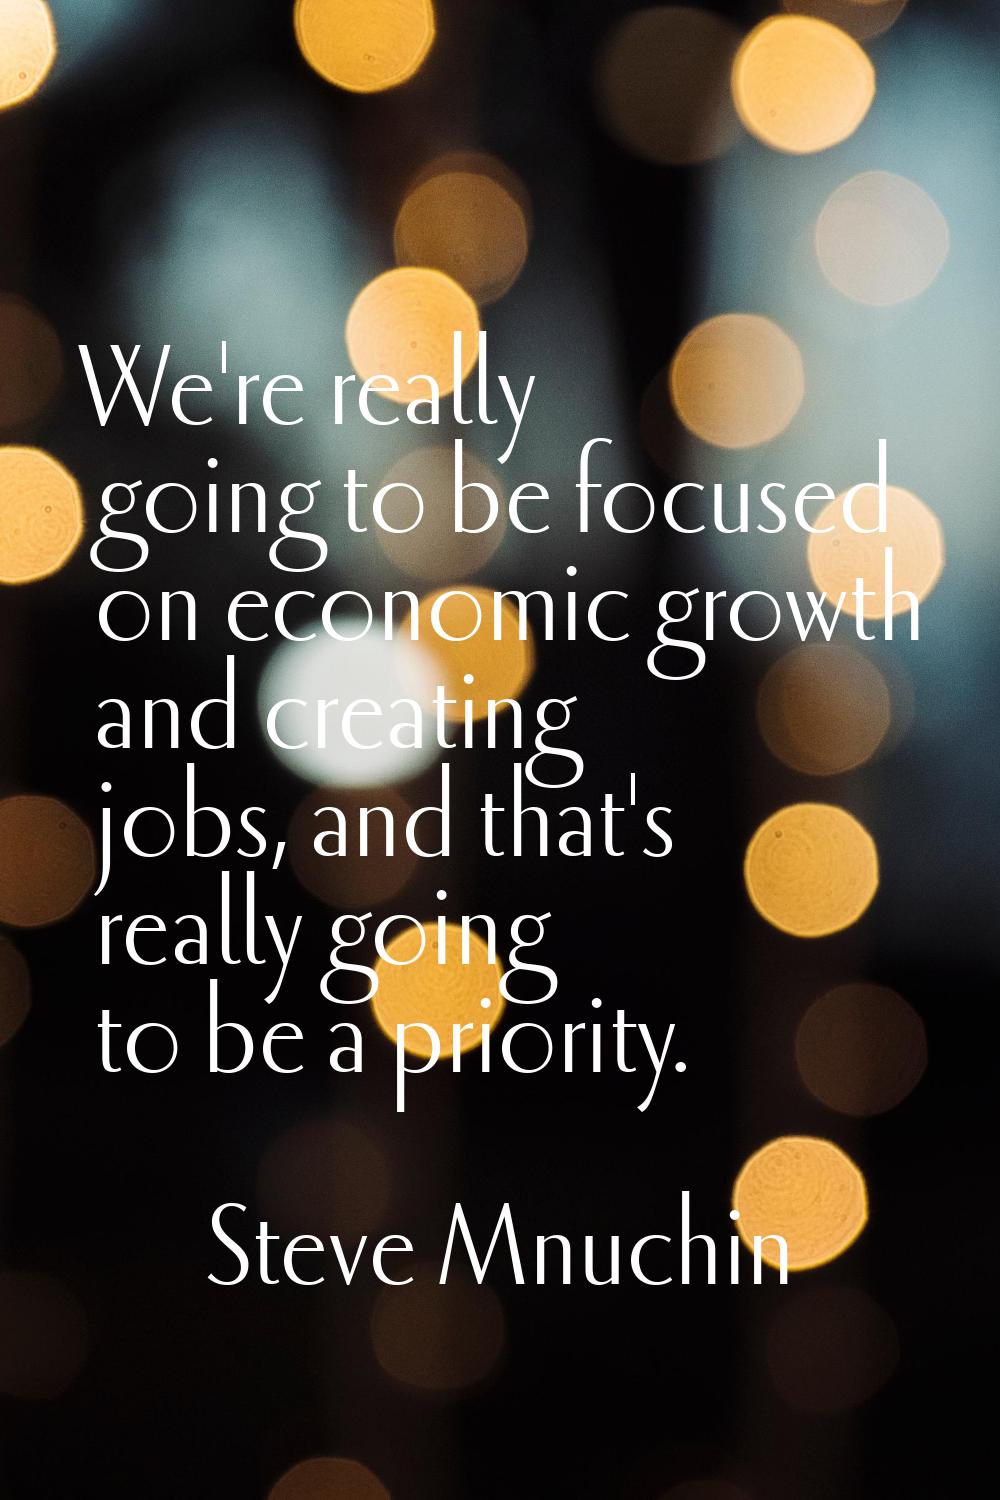 We're really going to be focused on economic growth and creating jobs, and that's really going to b